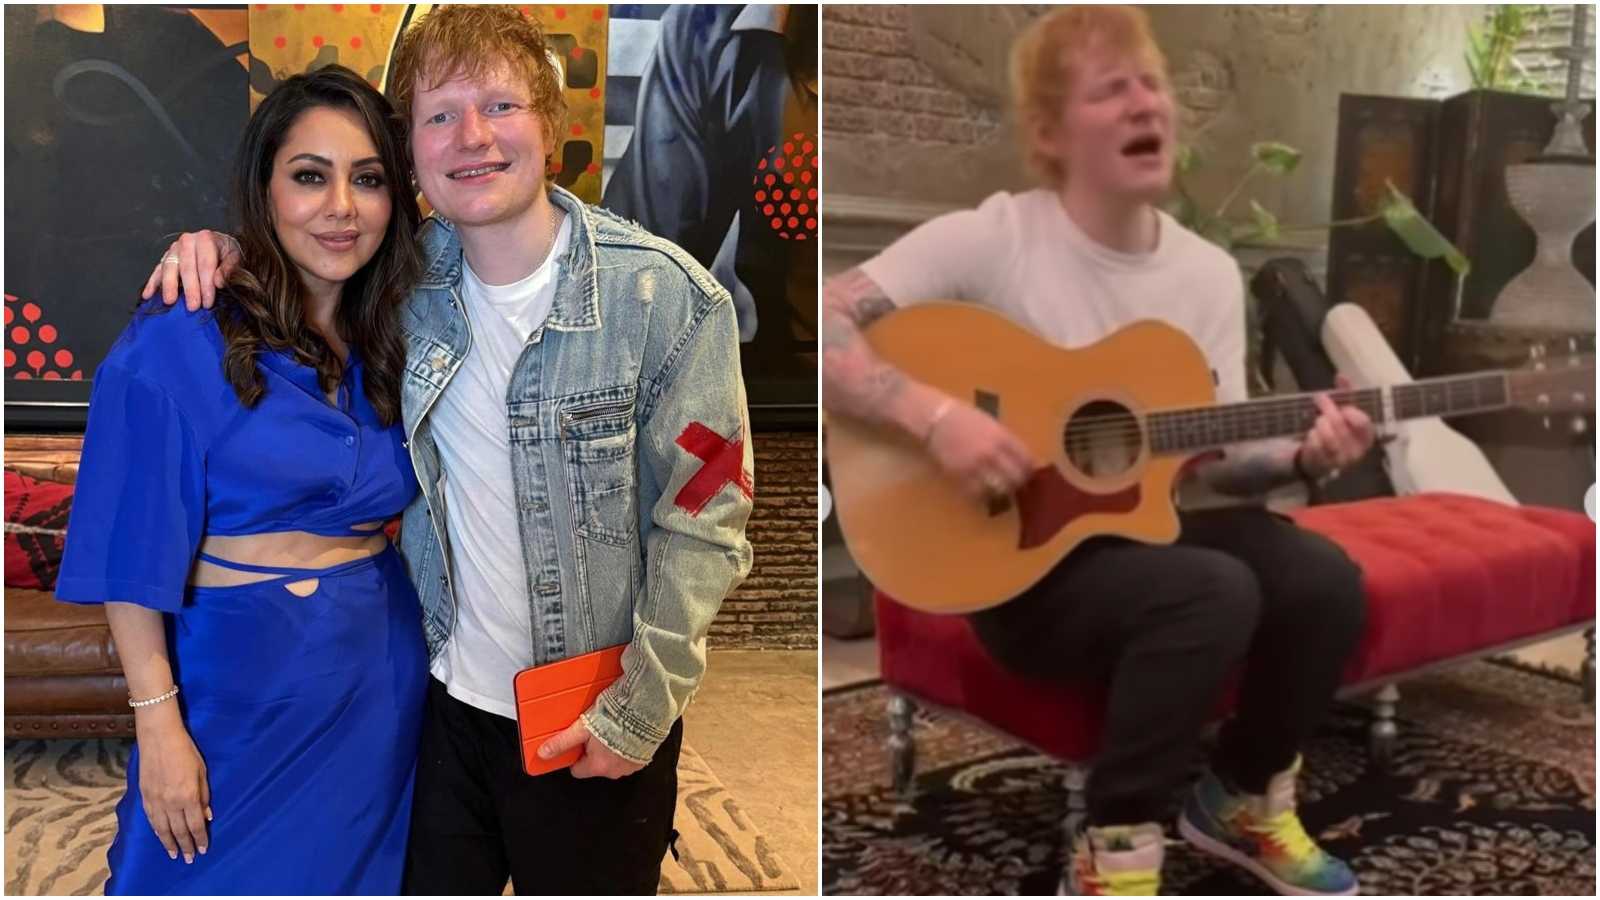 Watch: Gauri Khan shares a video of Ed Sheeran singing 'Thinking Out Loud', Aryan Khan gives him a special gift